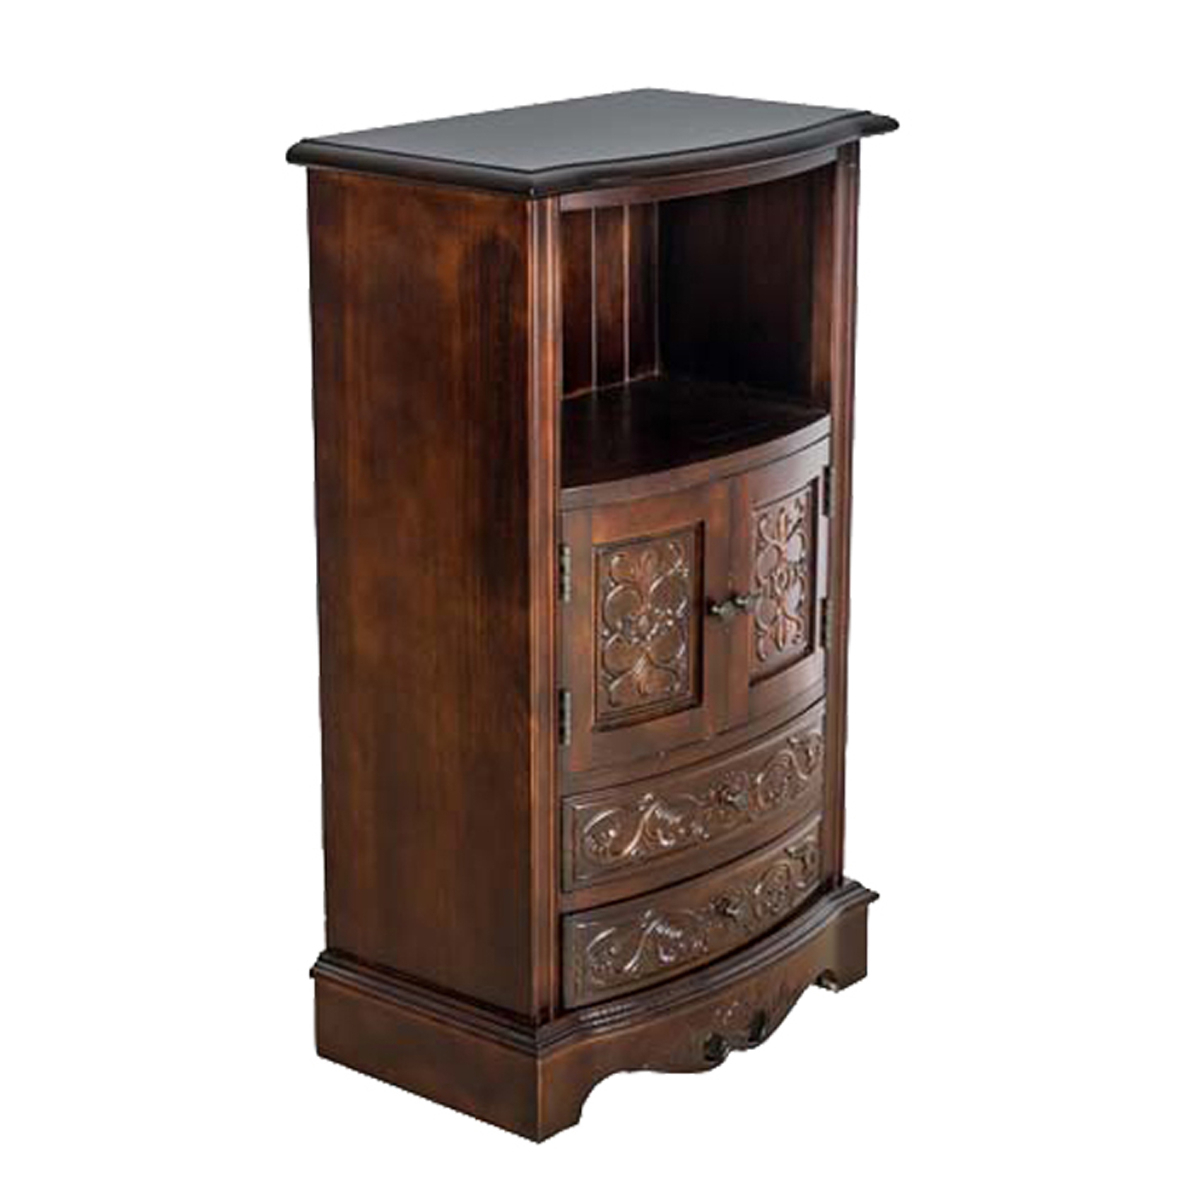 Engraved Wooden Frame Storage Cabinet With 2 Drawers And 2 Doors, Brown- Saltoro Sherpi